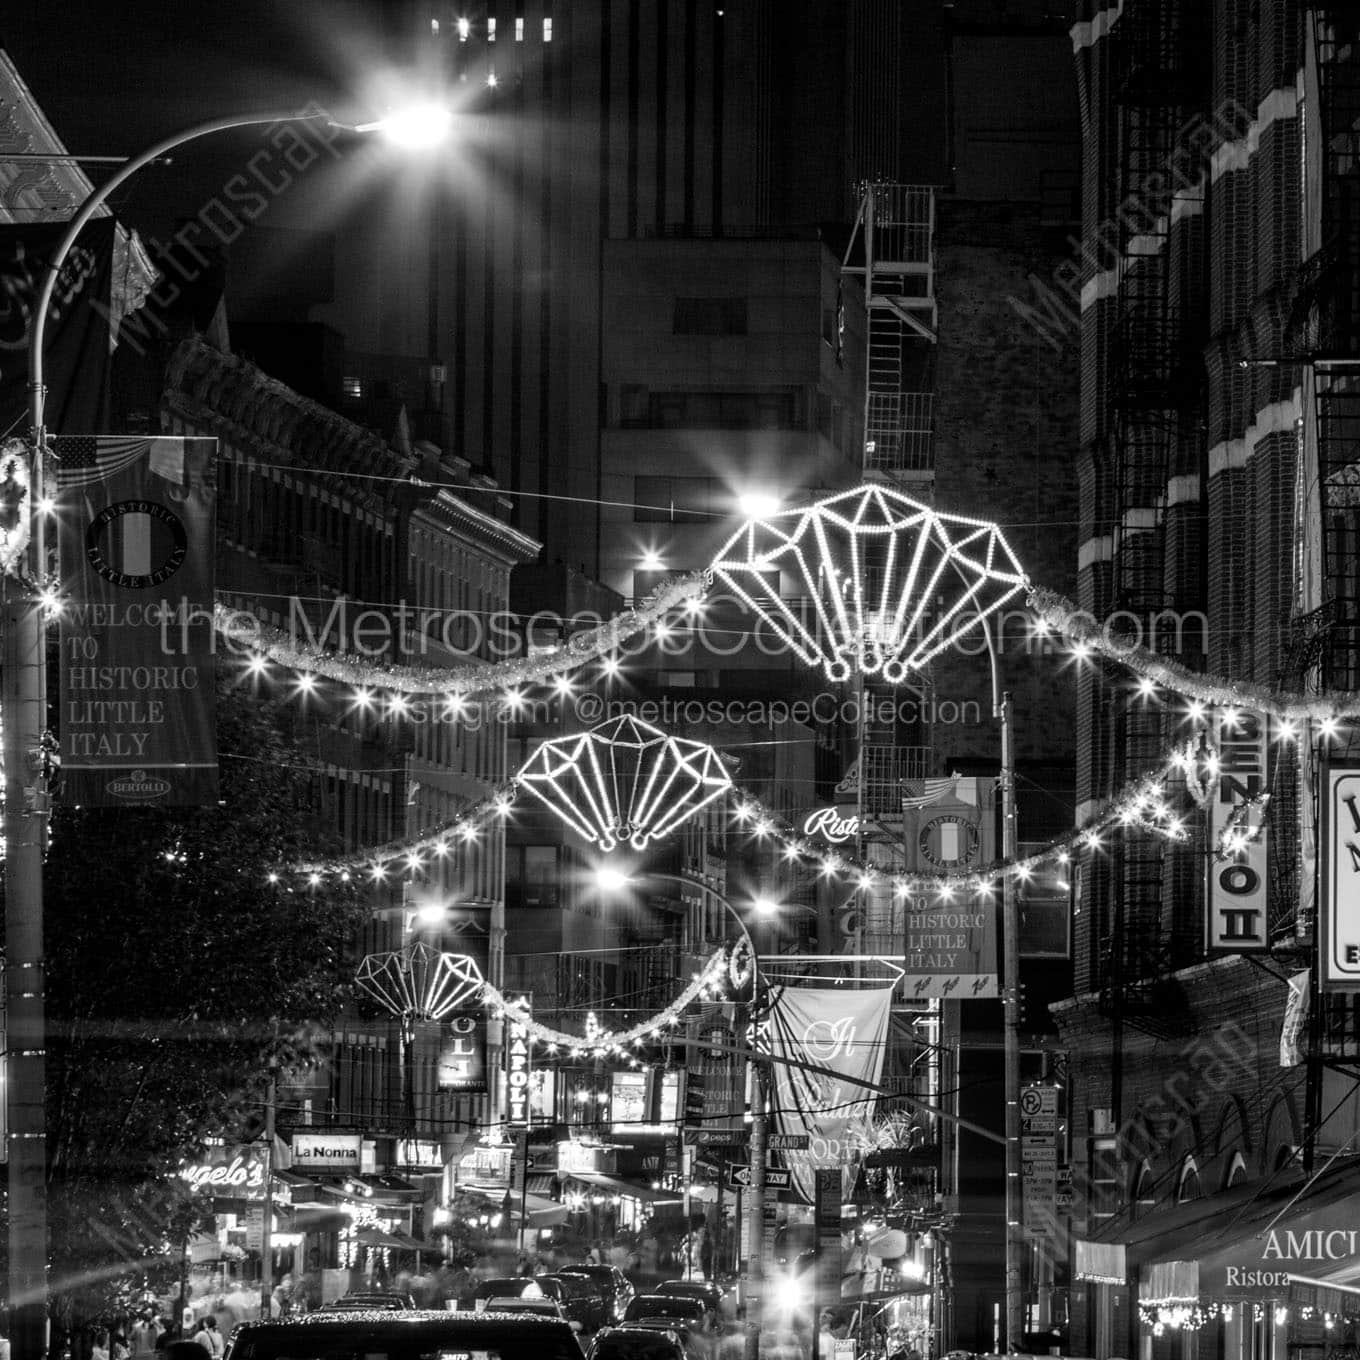 little italy nyc Black & White Wall Art